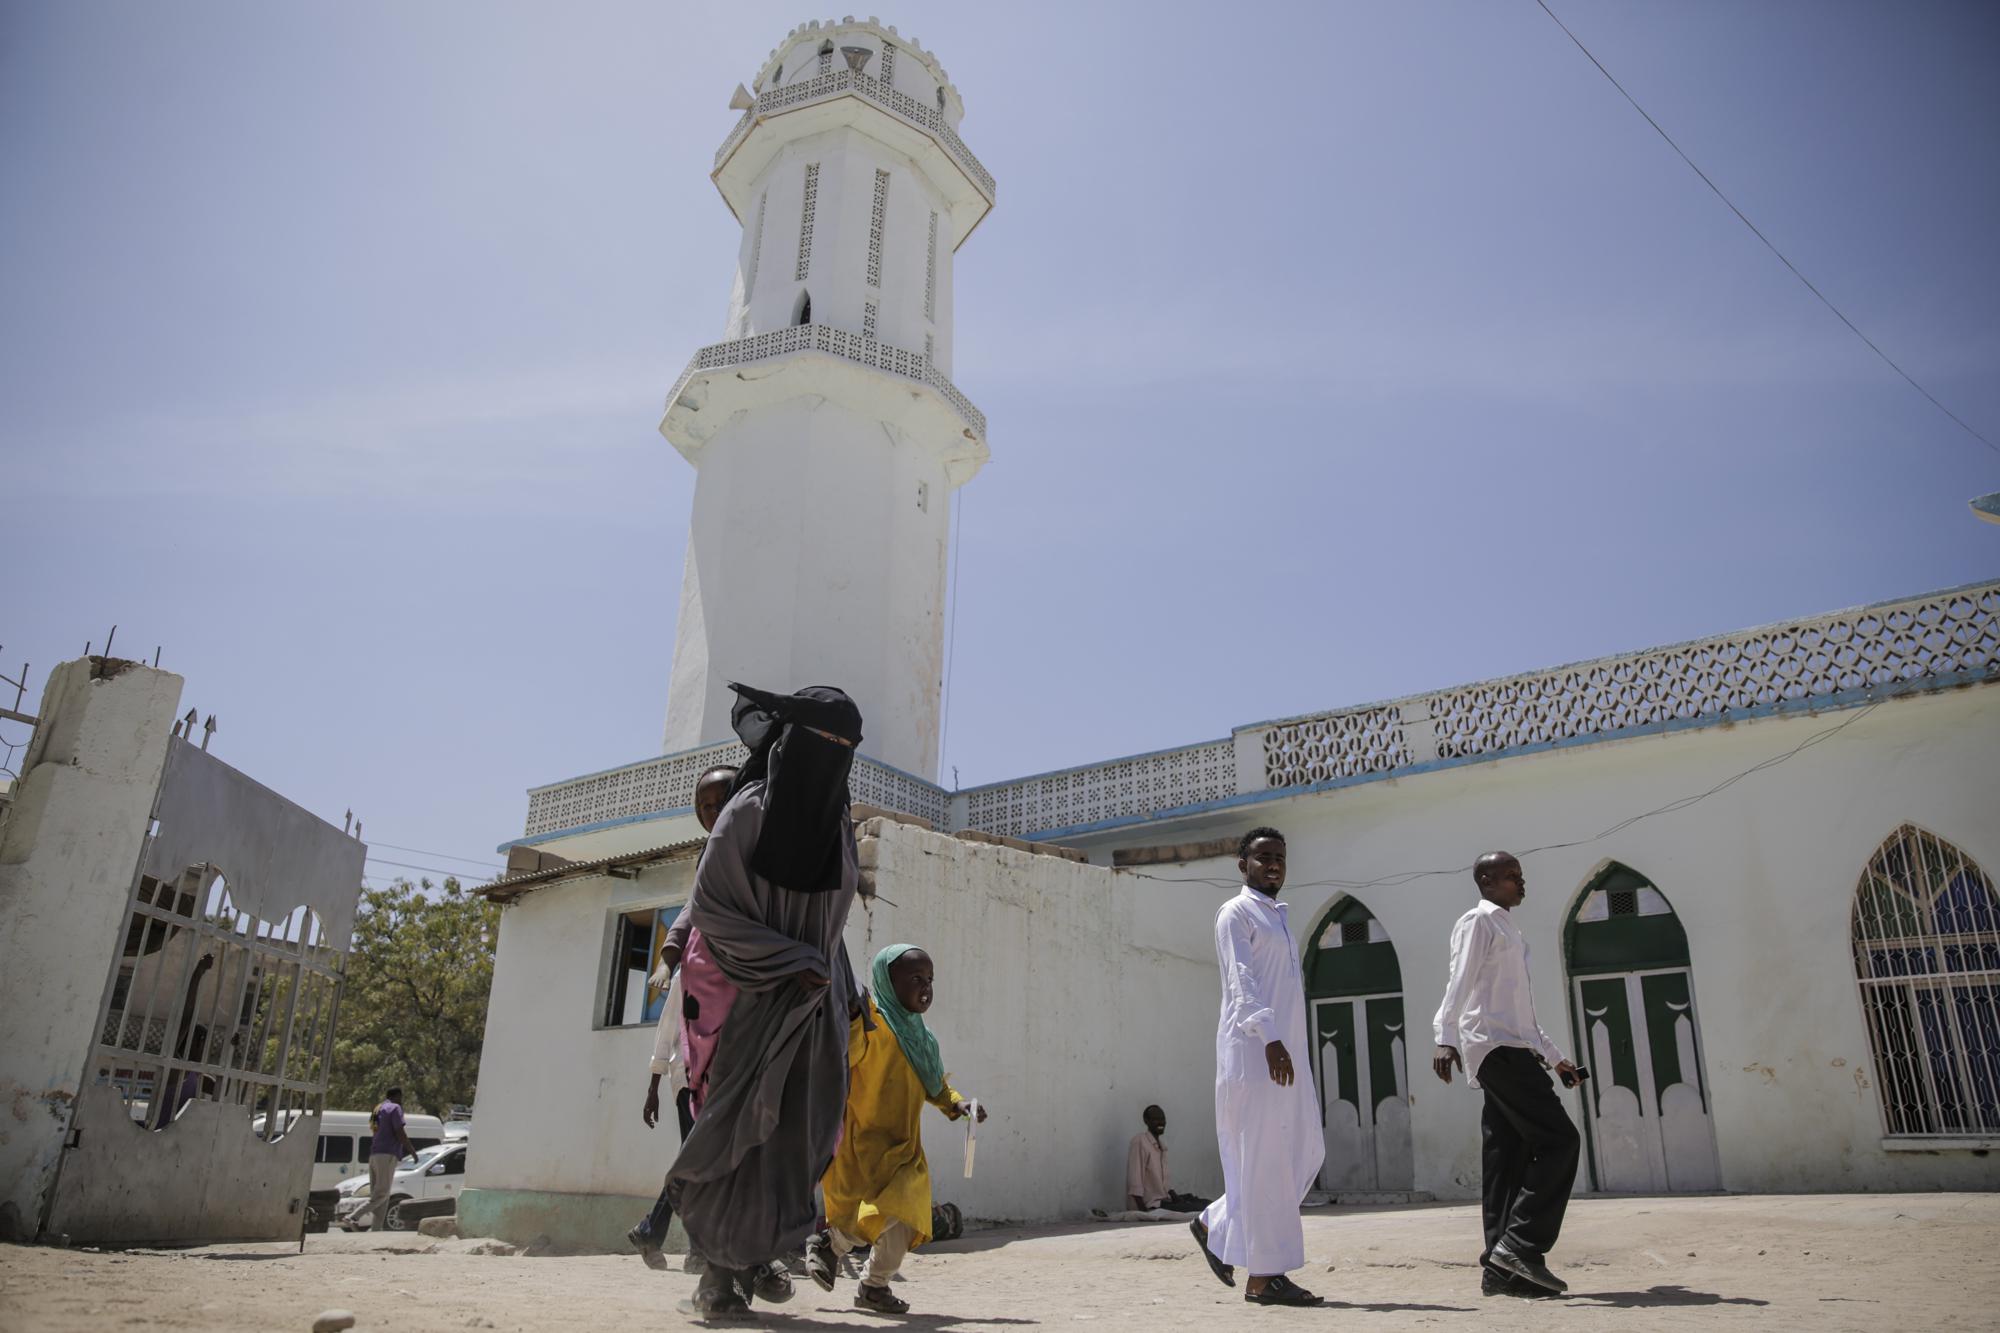 A female worshipper enters to make Friday Muslim prayers at a mosque in Hargeisa, Somaliland, a semi-autonomous breakaway region of Somalia, Friday, Feb. 11, 2022. Officials and health workers say cases of female genital mutilation increased during the pandemic in parts of Africa and particularly in Somaliland where 98 percent of girls aged 5 to 11 undergo the procedure. (AP Photo/Brian Inganga)